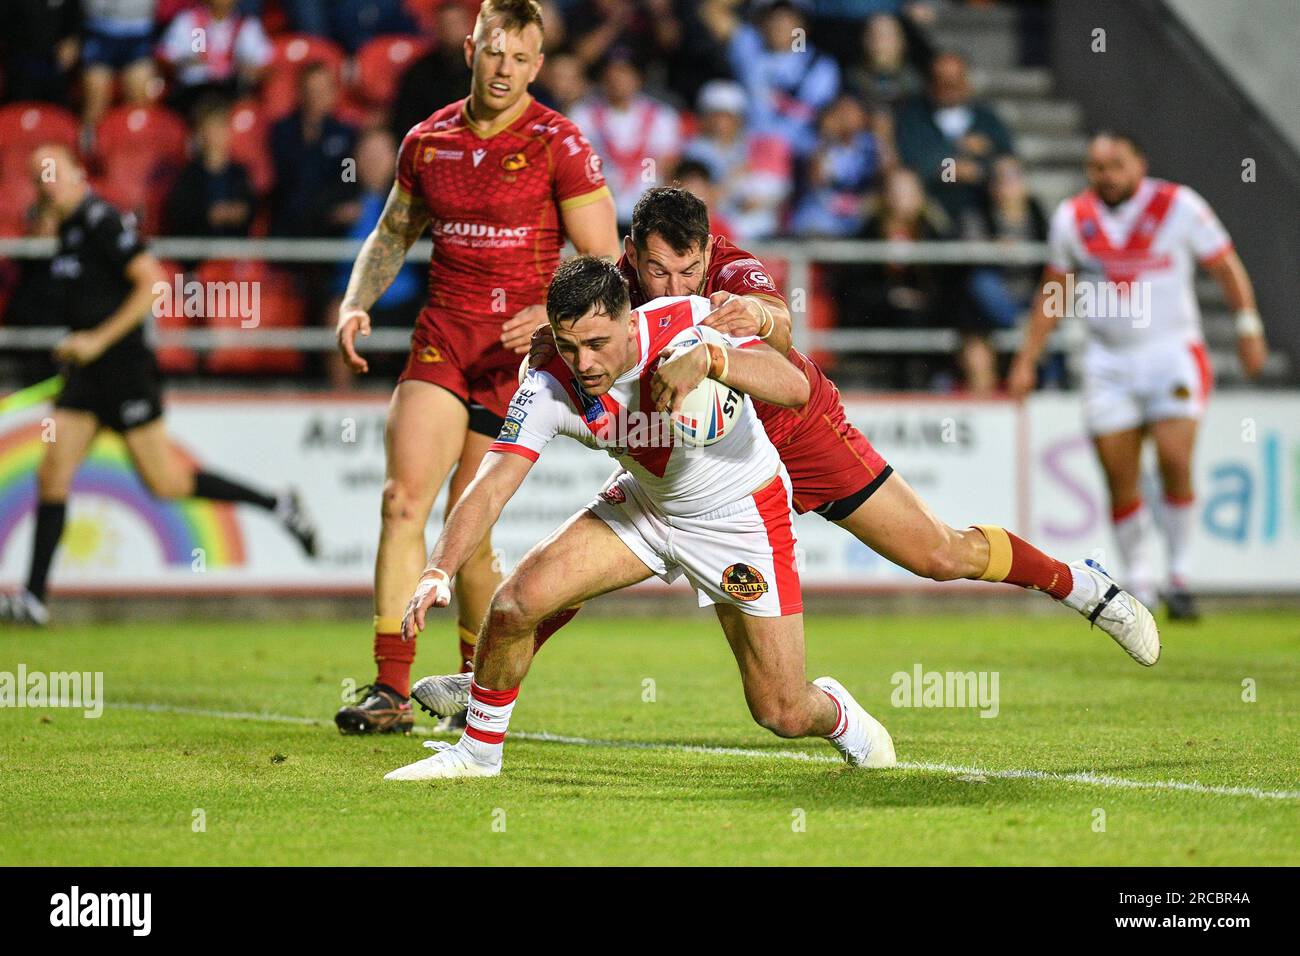 St. Helens, Angleterre - 13 juillet 2023 - Lewis Dodd de St Helens marque un essai. Betfred Super League, St. Helens vs Catalan Dragons au Totally Wicked Stadium, St. Helens, Royaume-Uni Banque D'Images